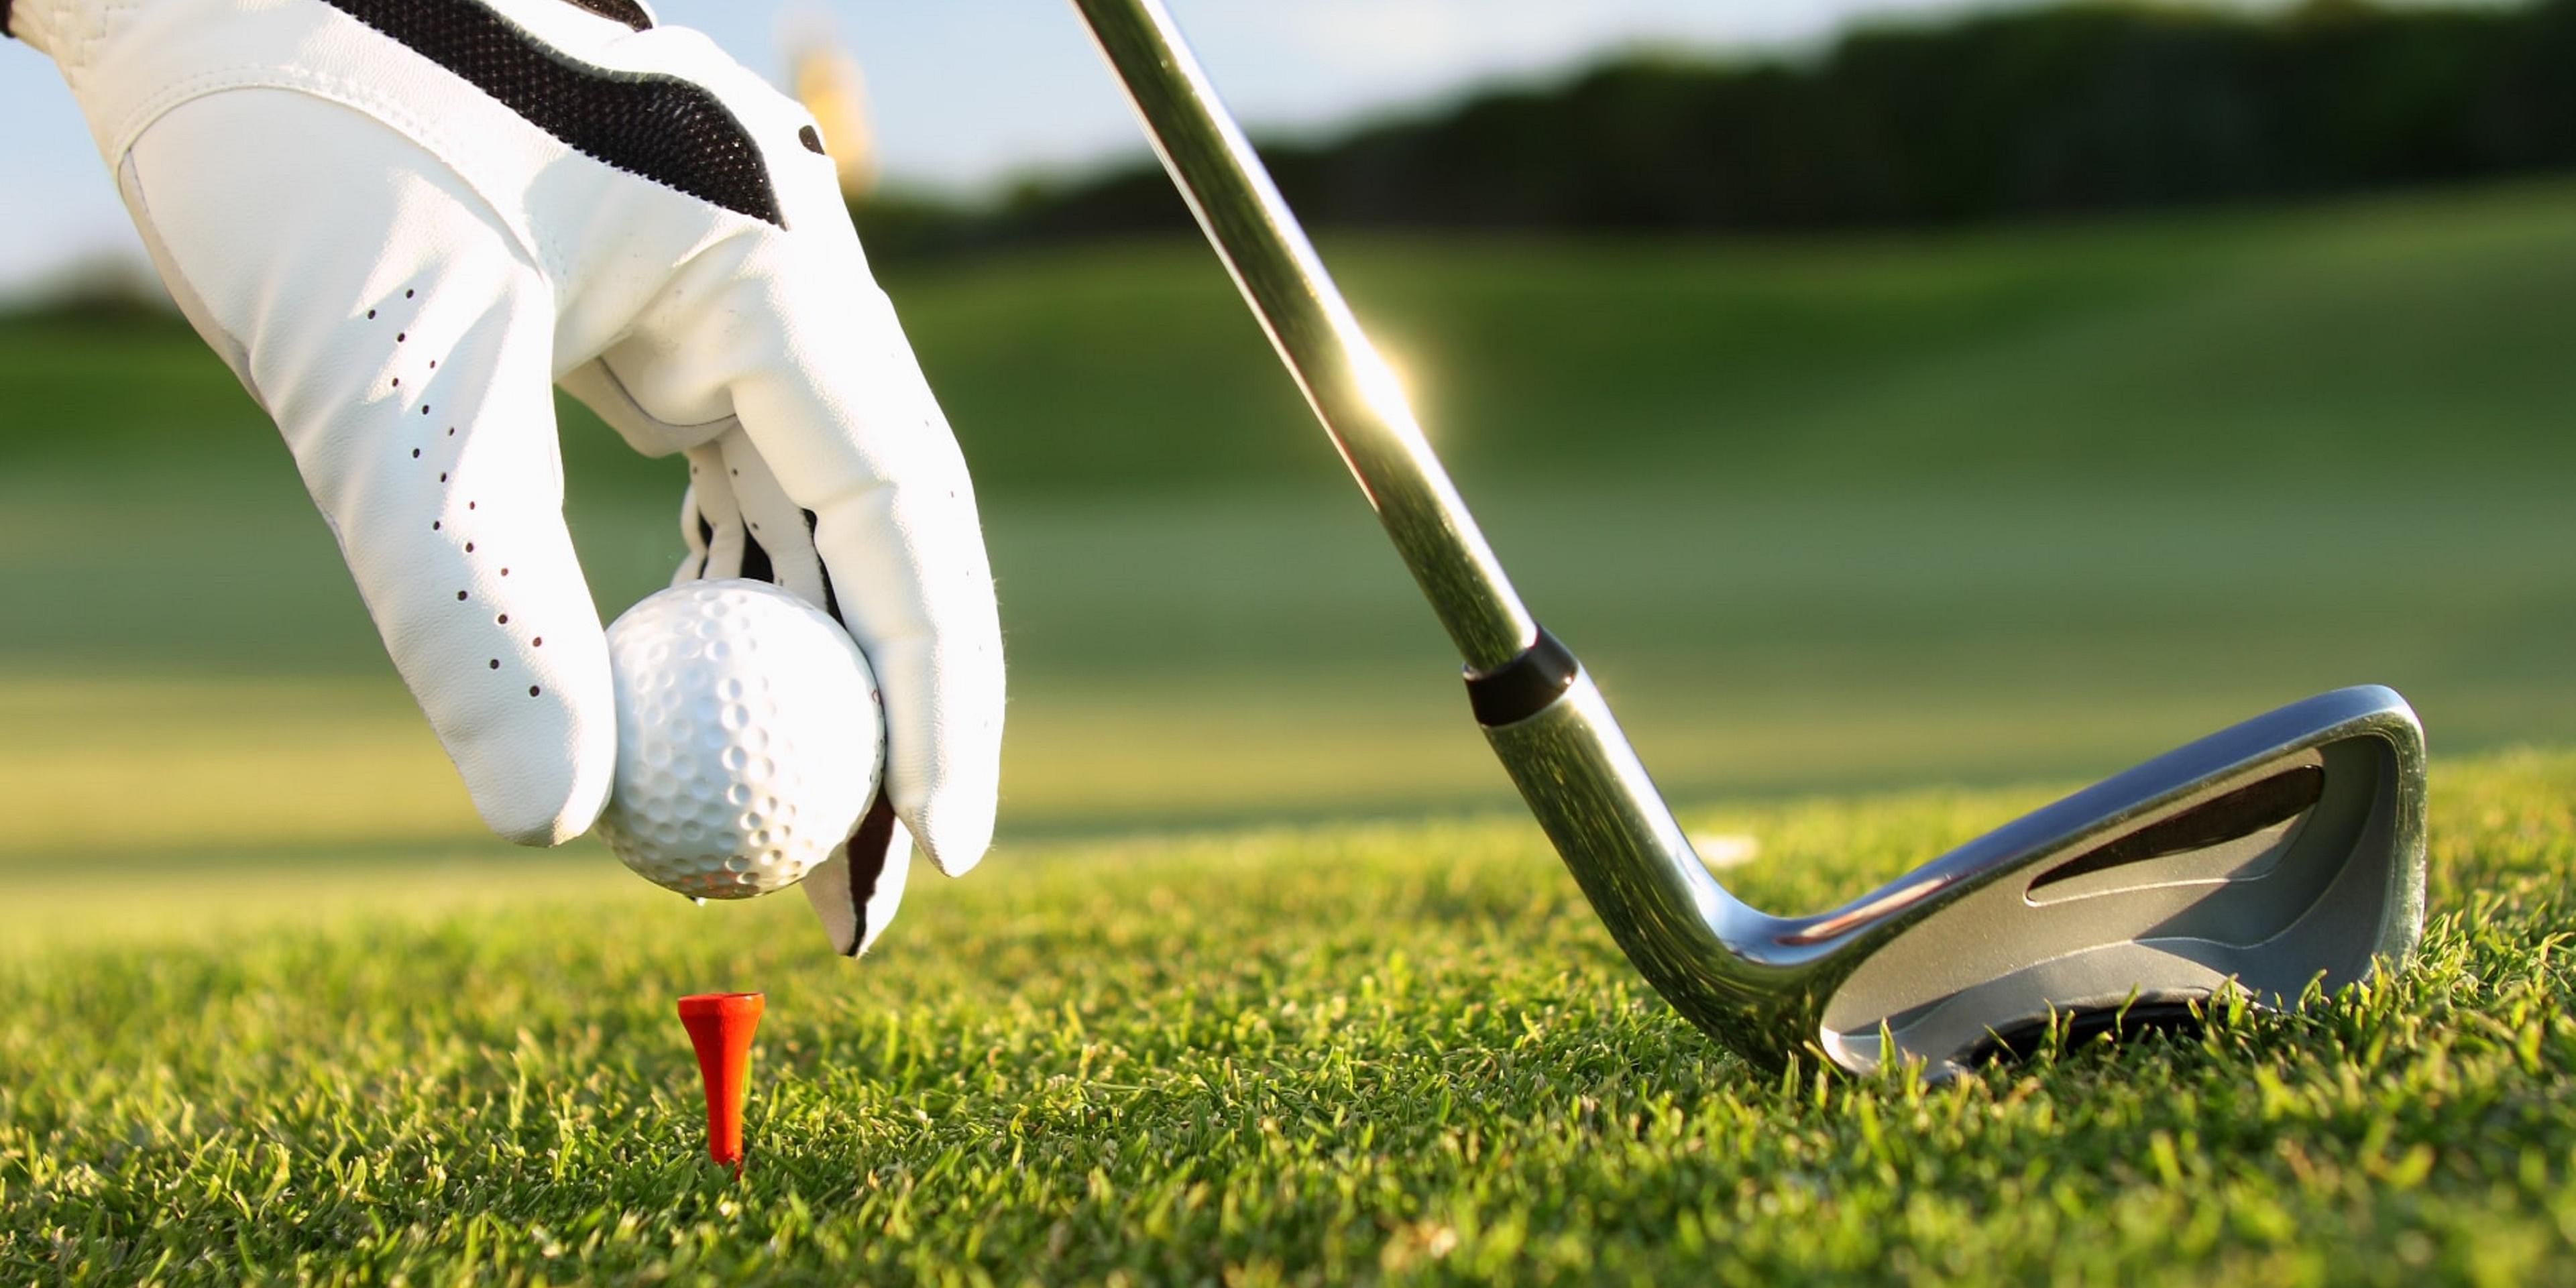 Located 3 miles from the Bethlehem Municipal Golf Course where you can play 18 holes, hit at the driving range or take lessons. Shuttle service to the golf course can be arranged. 